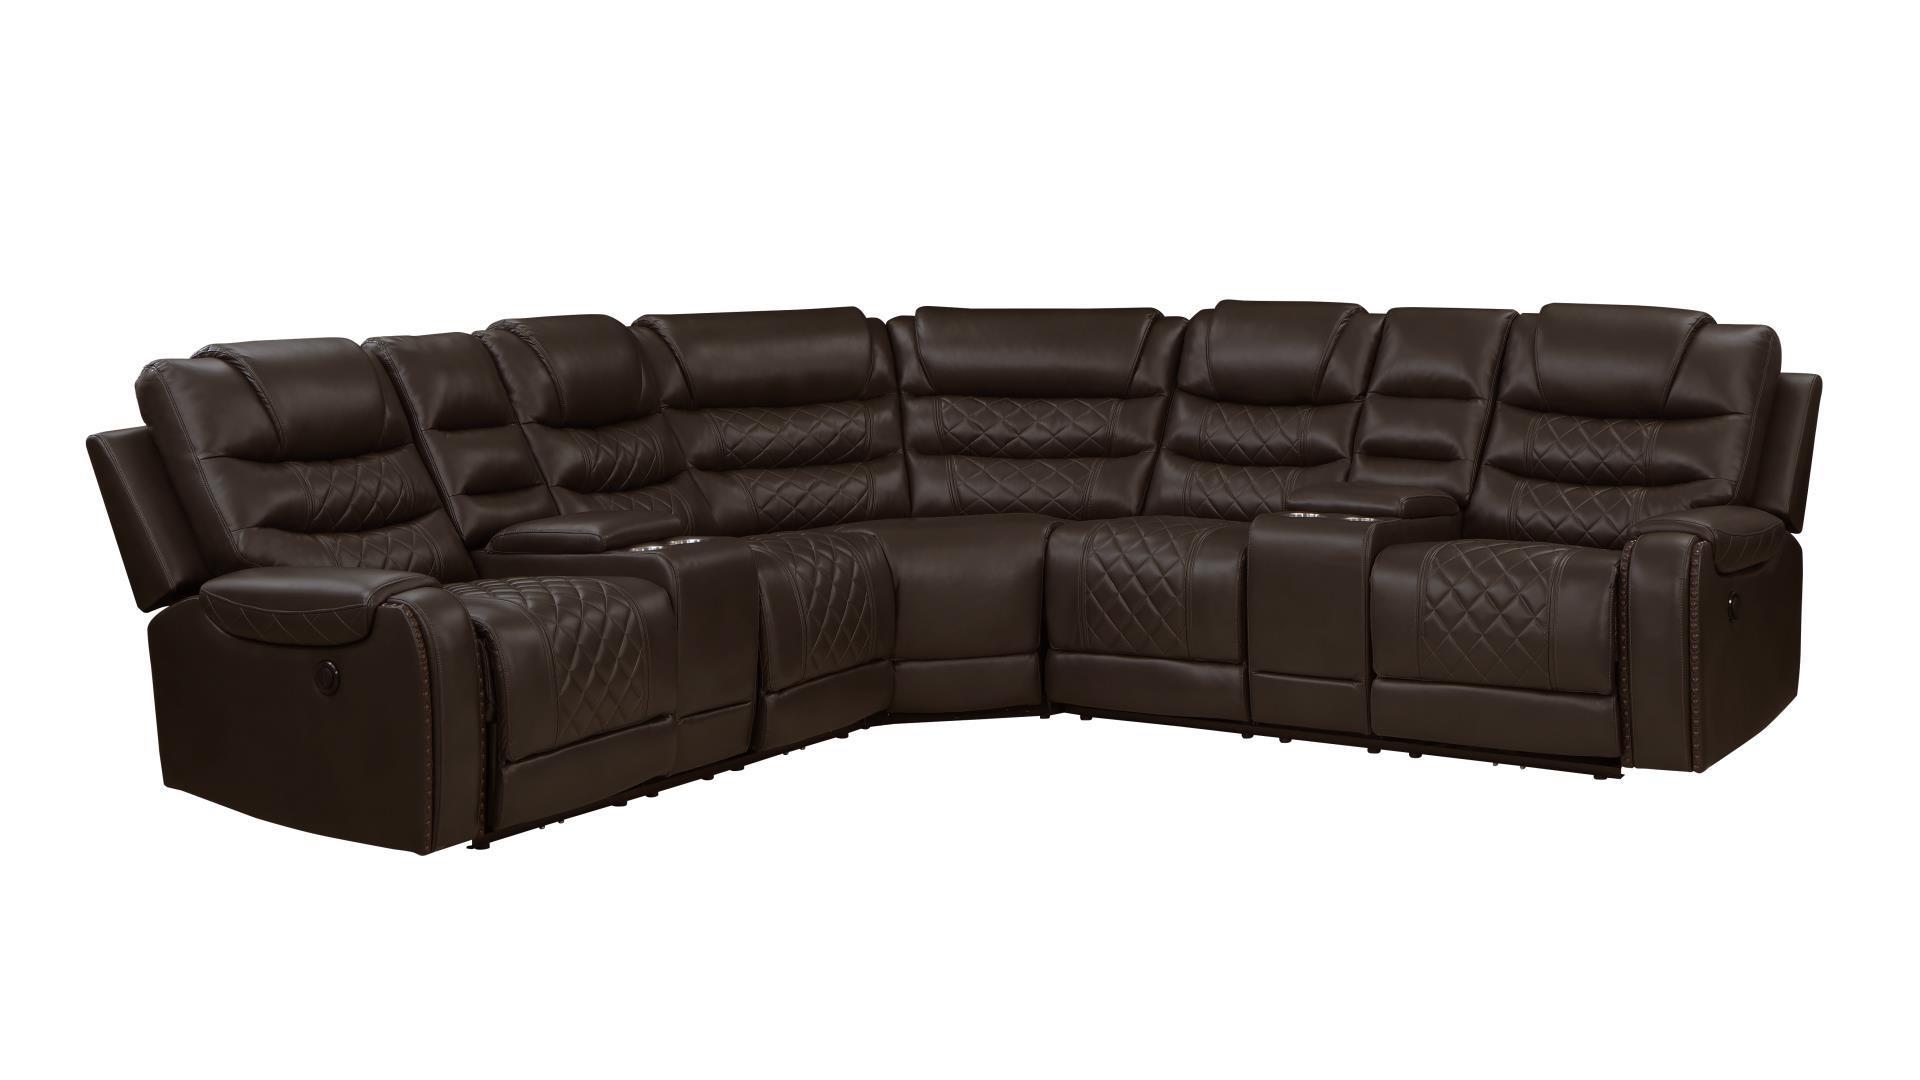 Contemporary, Modern Recliner Sectional TENNESSEE-BR-Sect TENNESSEE-BR-Sect in Espresso Eco Leather